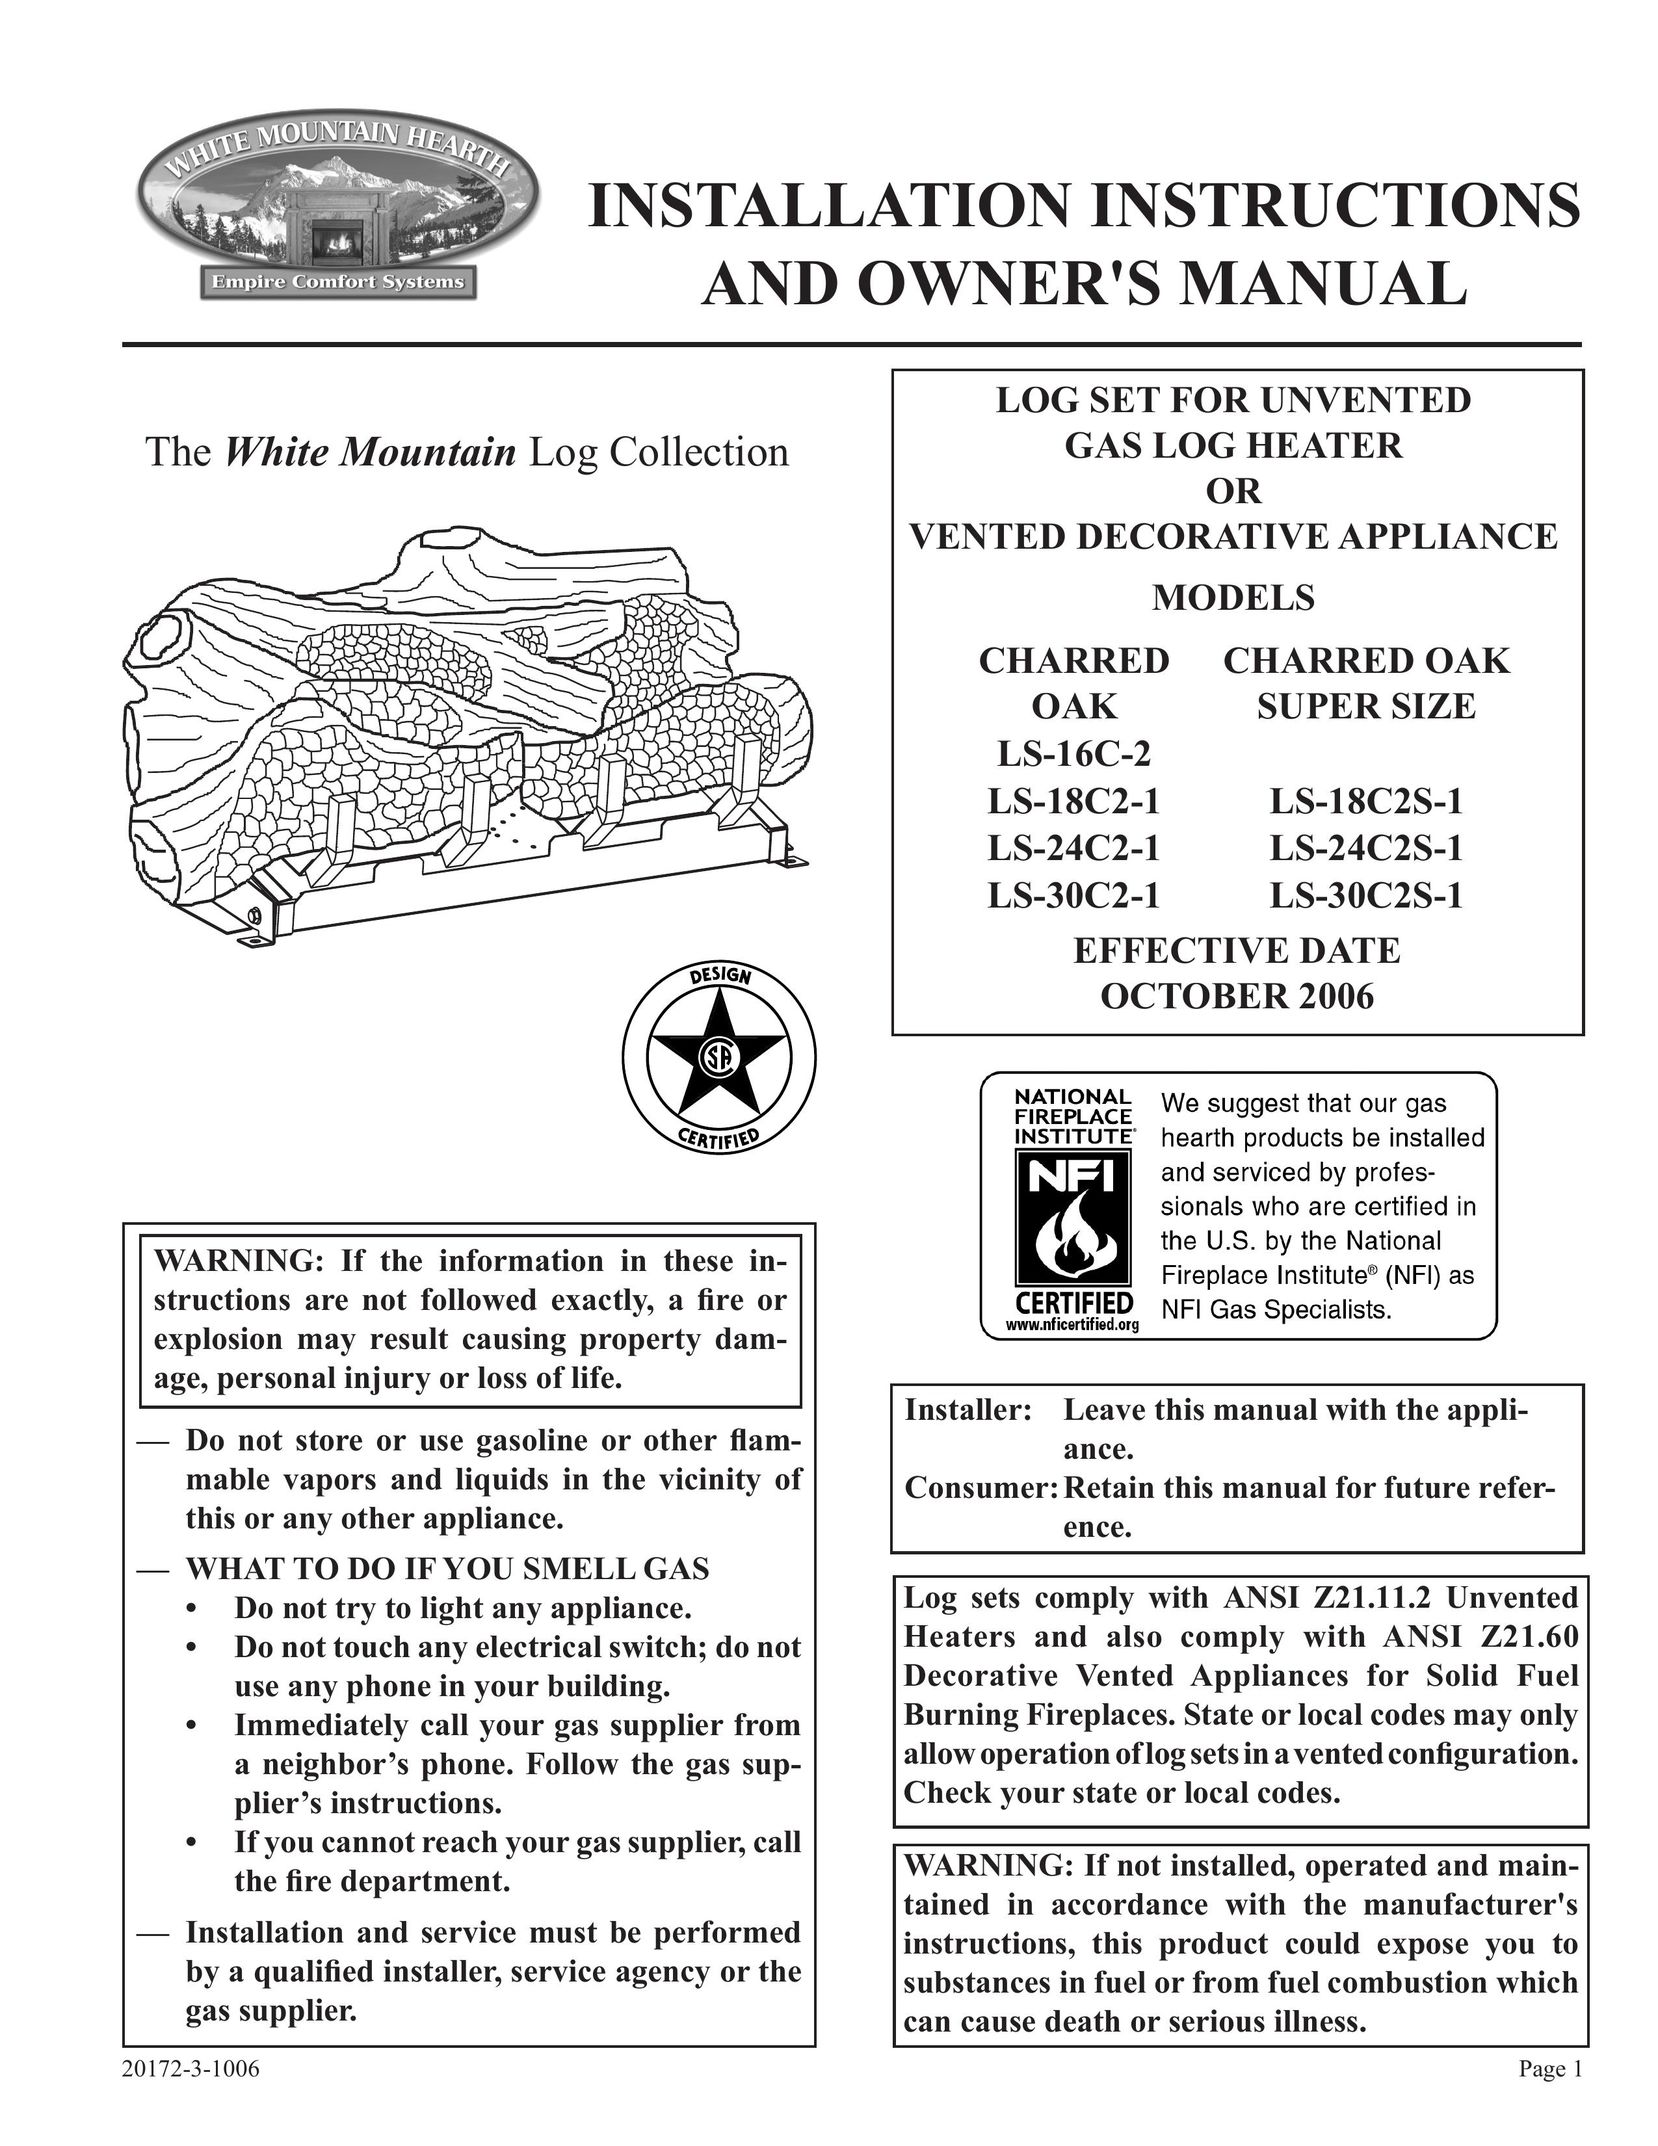 Empire Comfort Systems LS-24C2S-1 Gas Heater User Manual